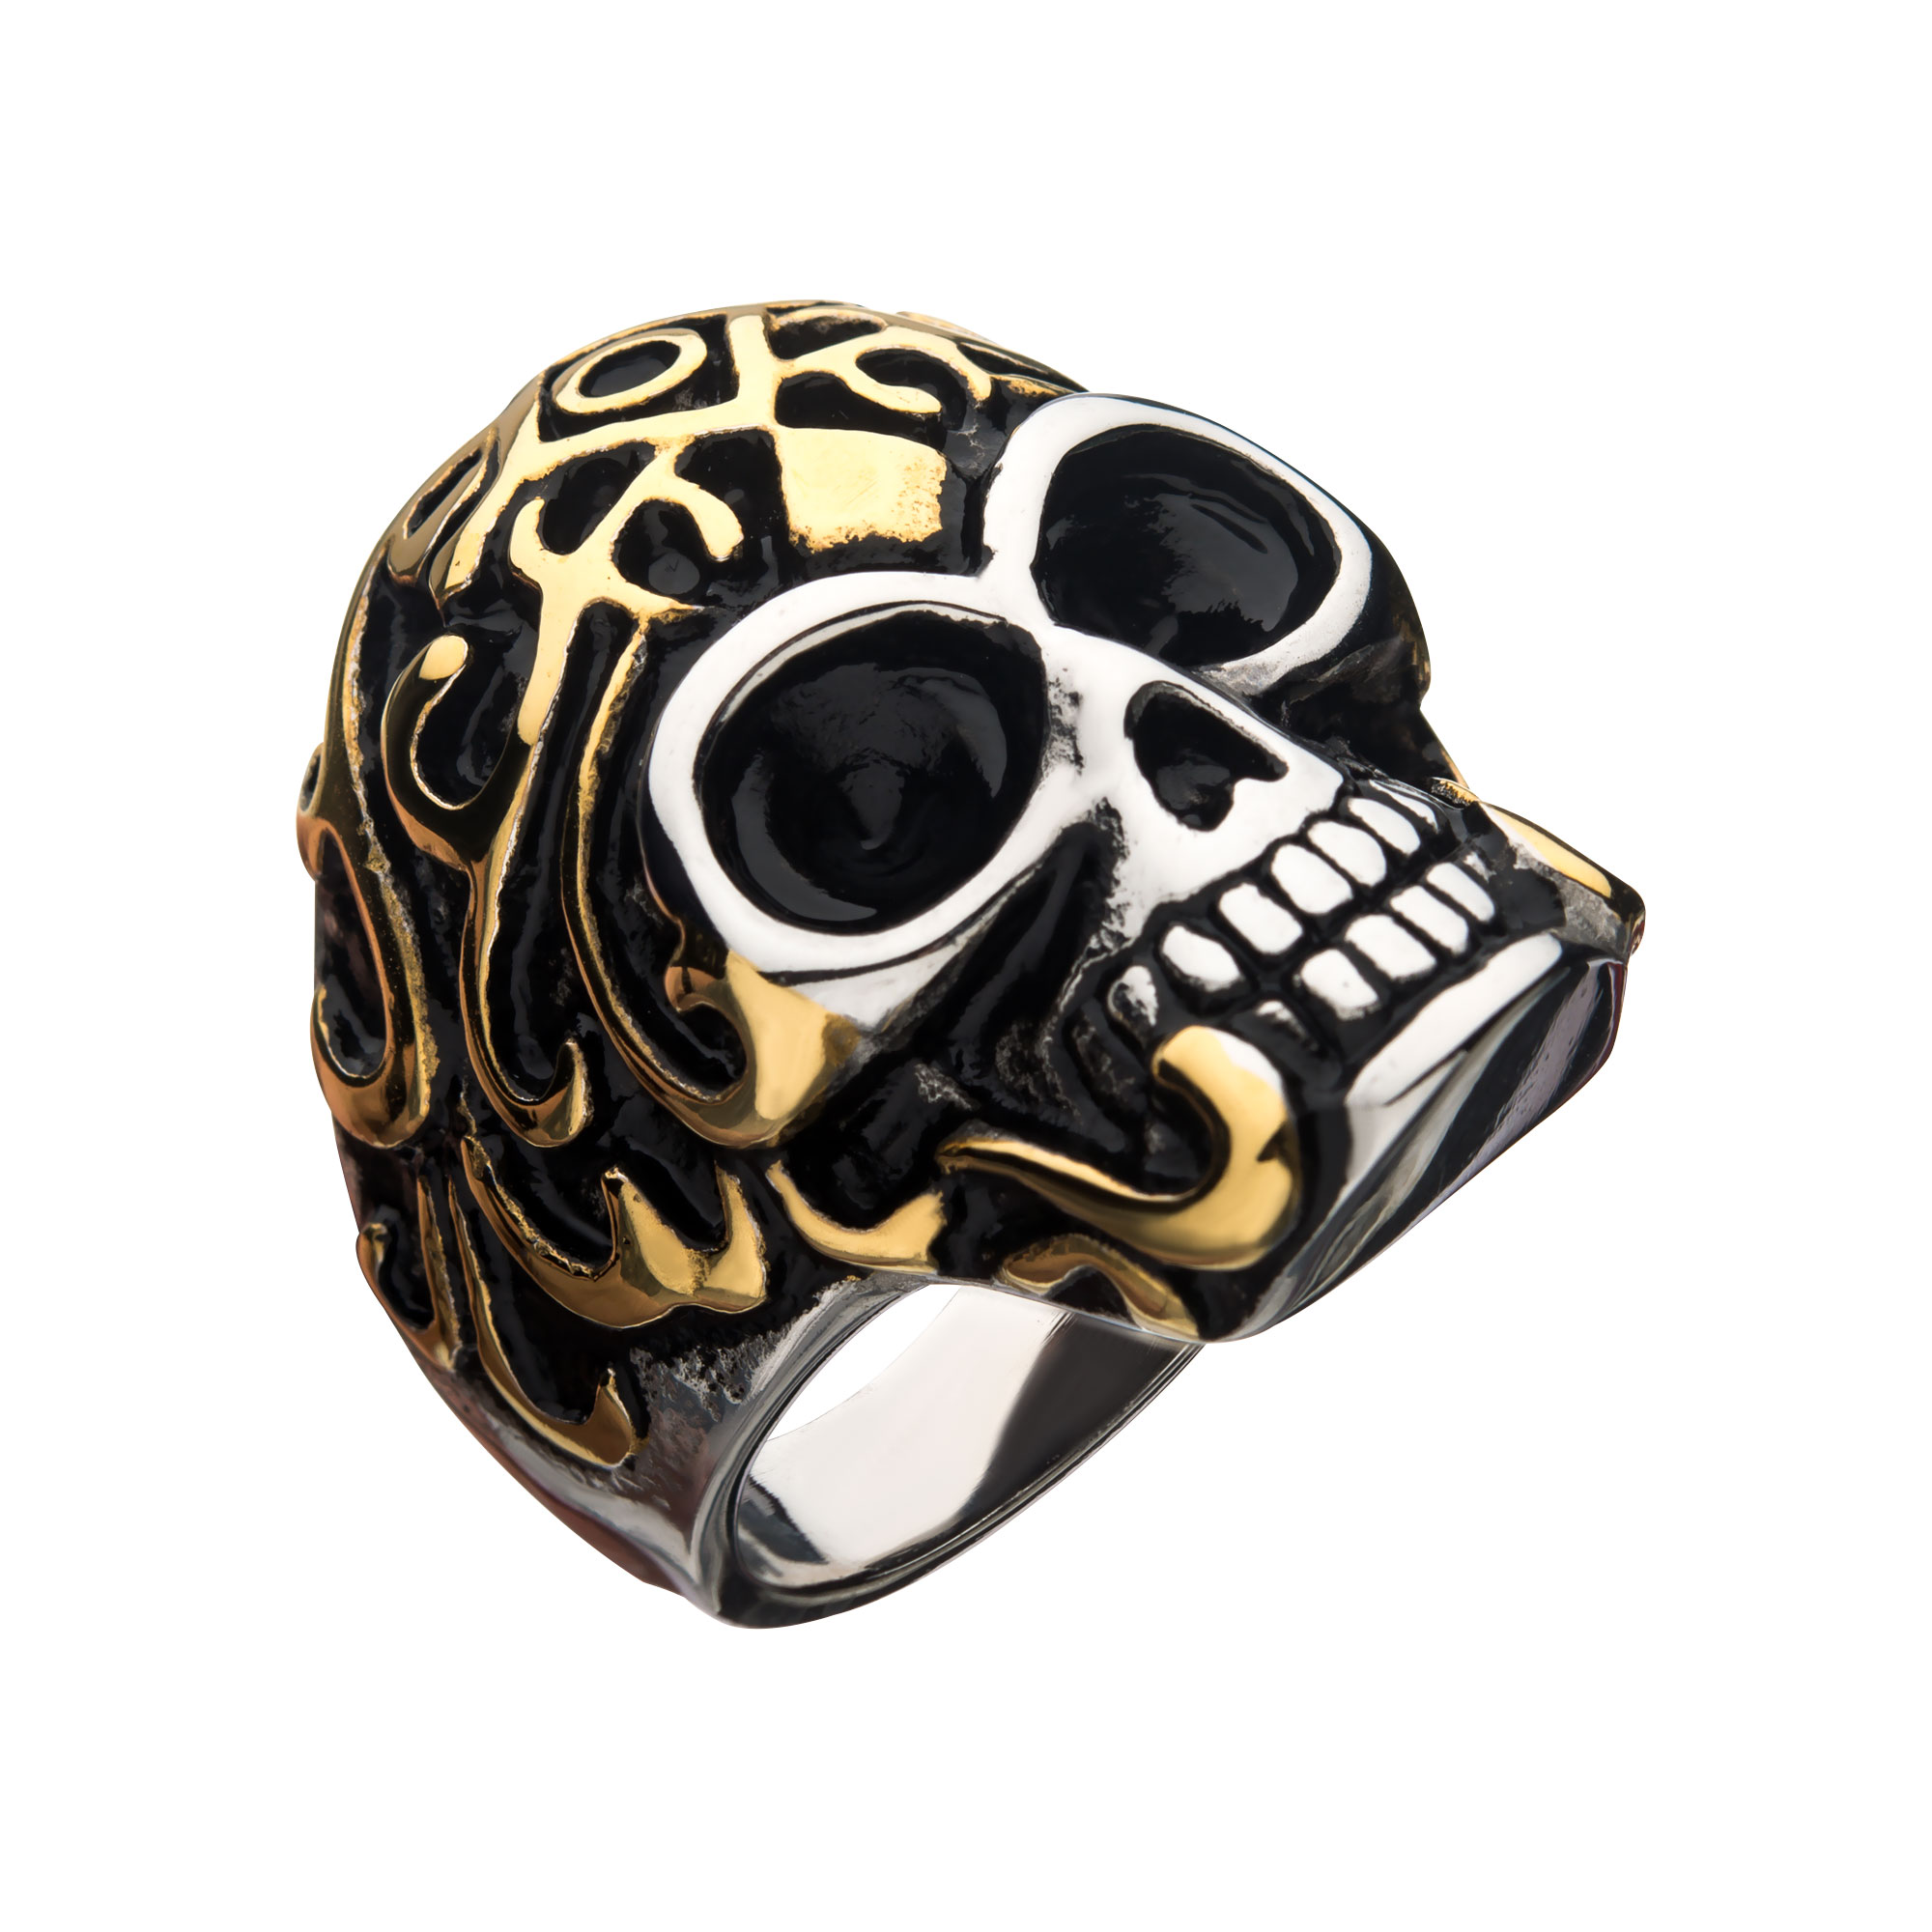 Oxidized Stainless Steel & Gold IP Skull Ring Milano Jewelers Pembroke Pines, FL